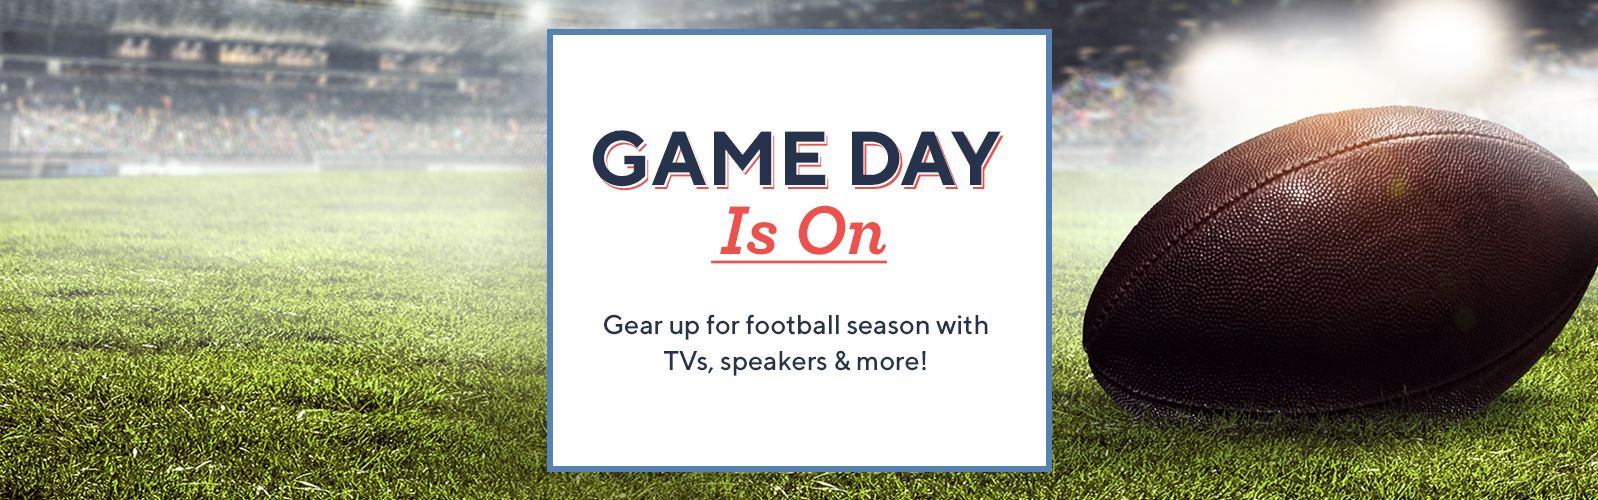 Game Day Is On.  Gear up for football season with TVs, speakers & more!